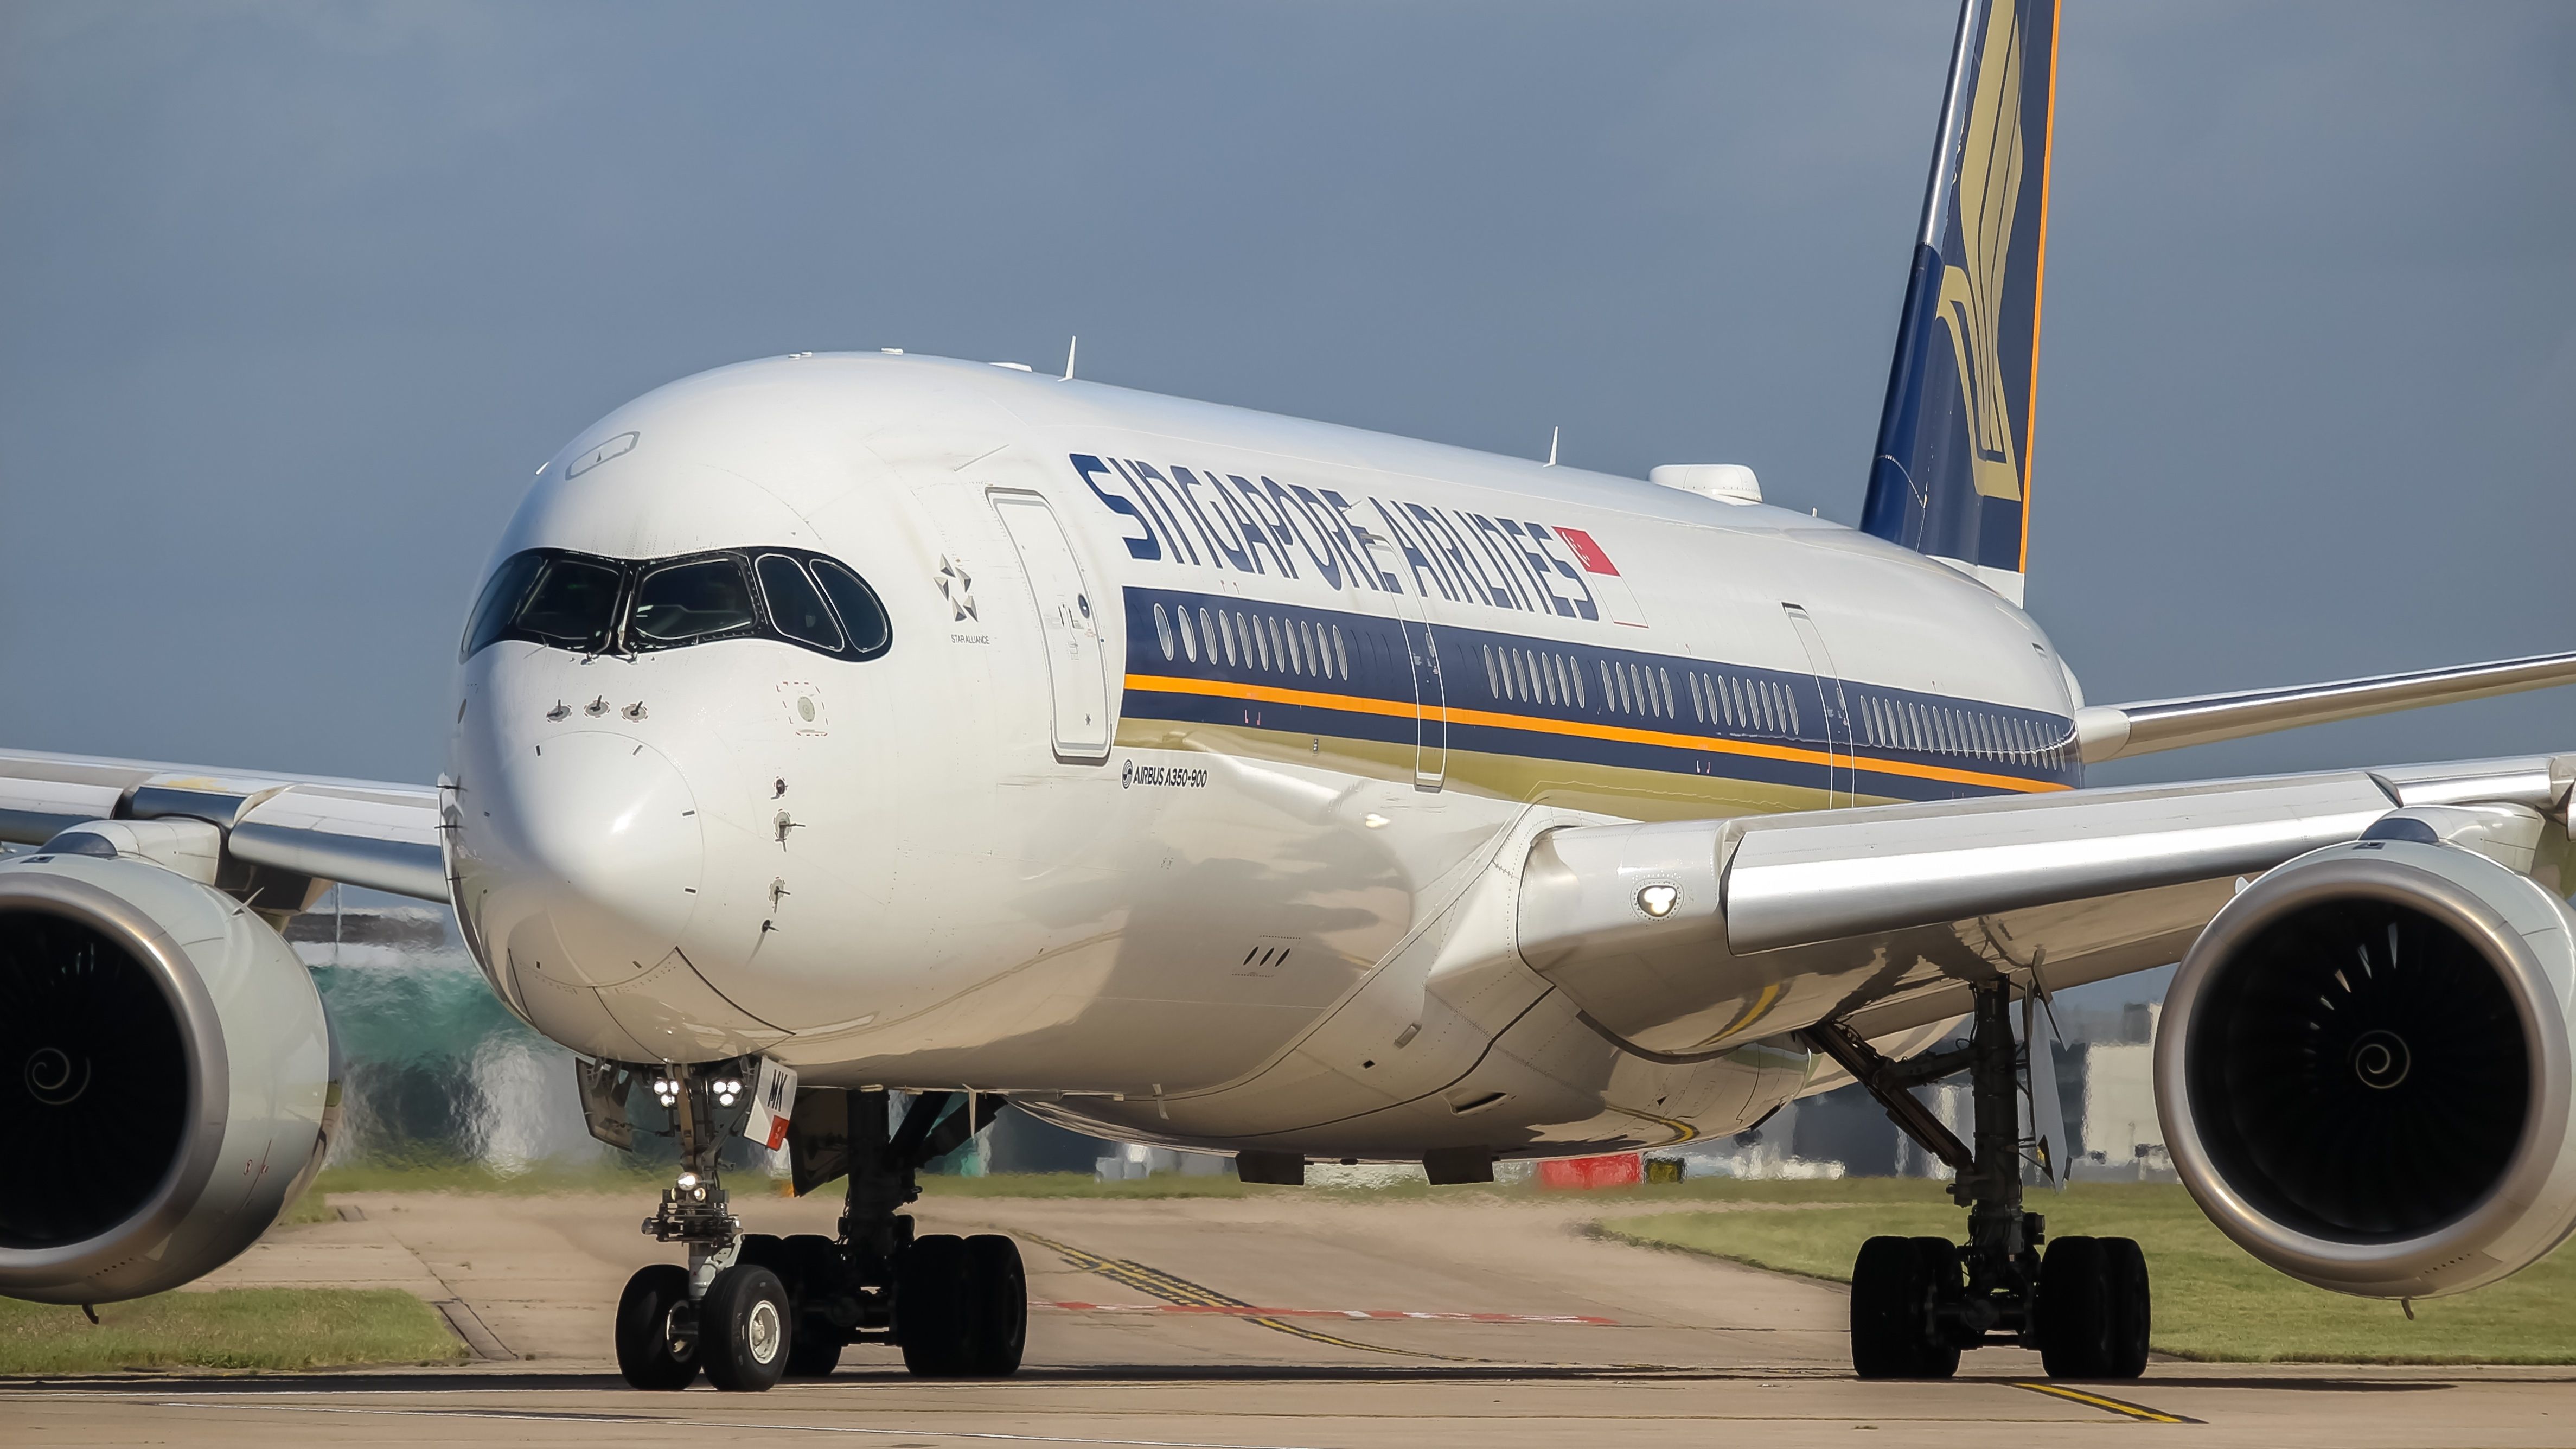 A Singapore Airlines Airbus A350 on an airport apron.